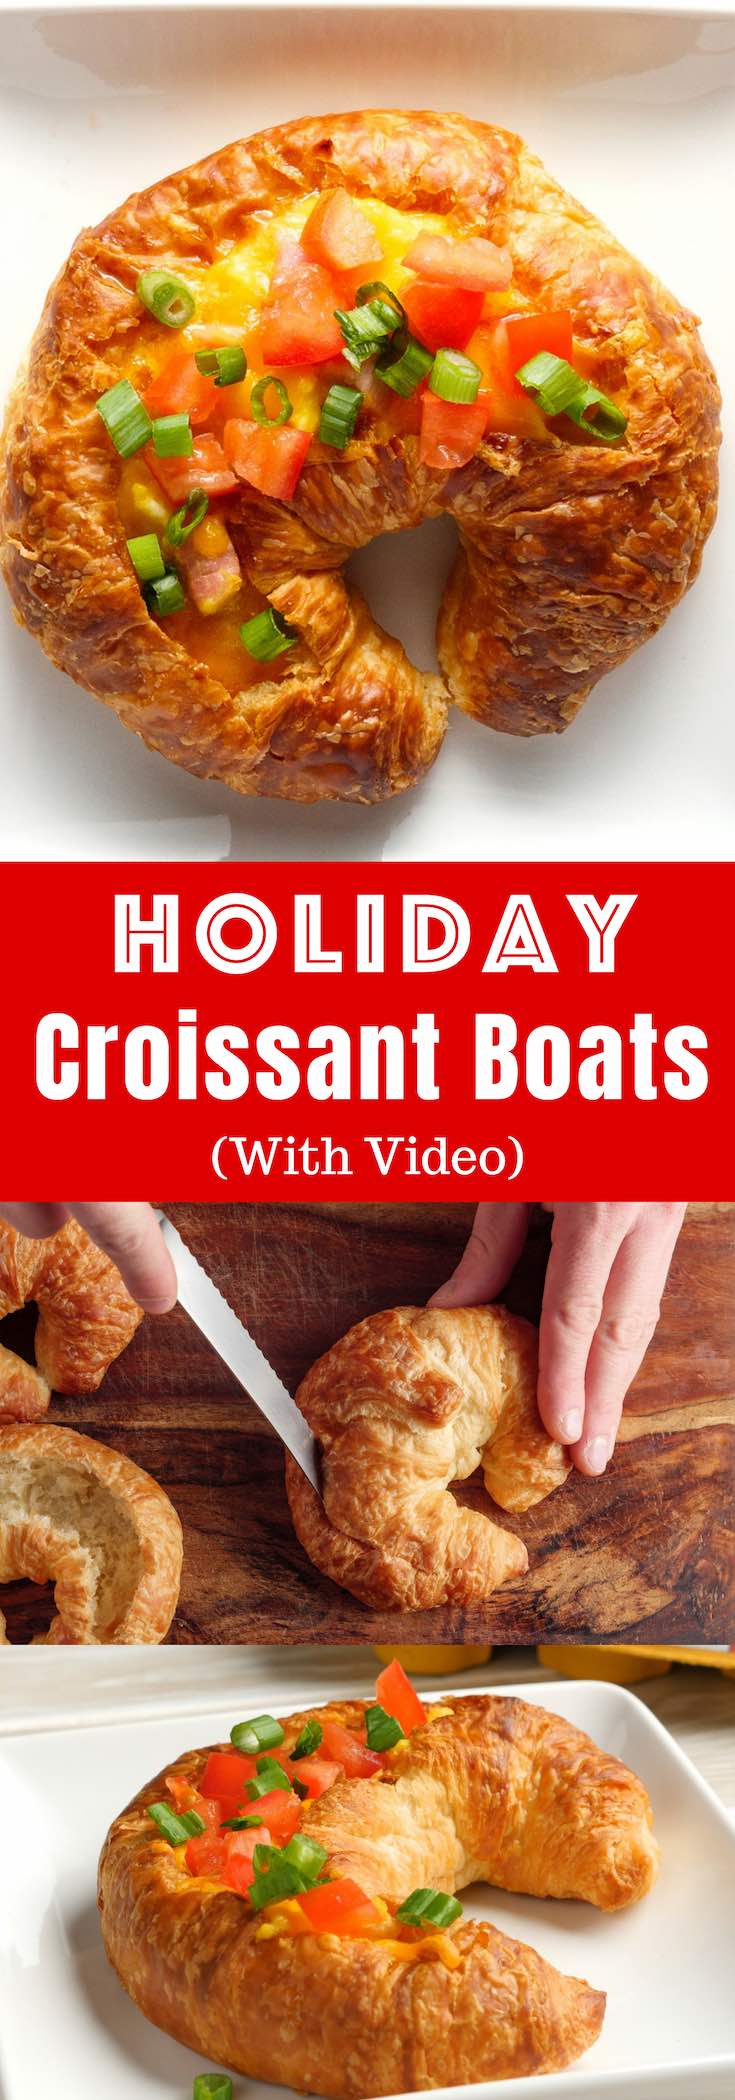 Holiday Croissant Boats are a fun and easy breakfast or brunch recipe that everyone will love, featuring fluffy omelet with ham and cheese baked inside of a flaky croissant. So delicious! Video recipe. @Happyeggcousa #HappyHenHappyEgg #FreeestFreeRange #AD